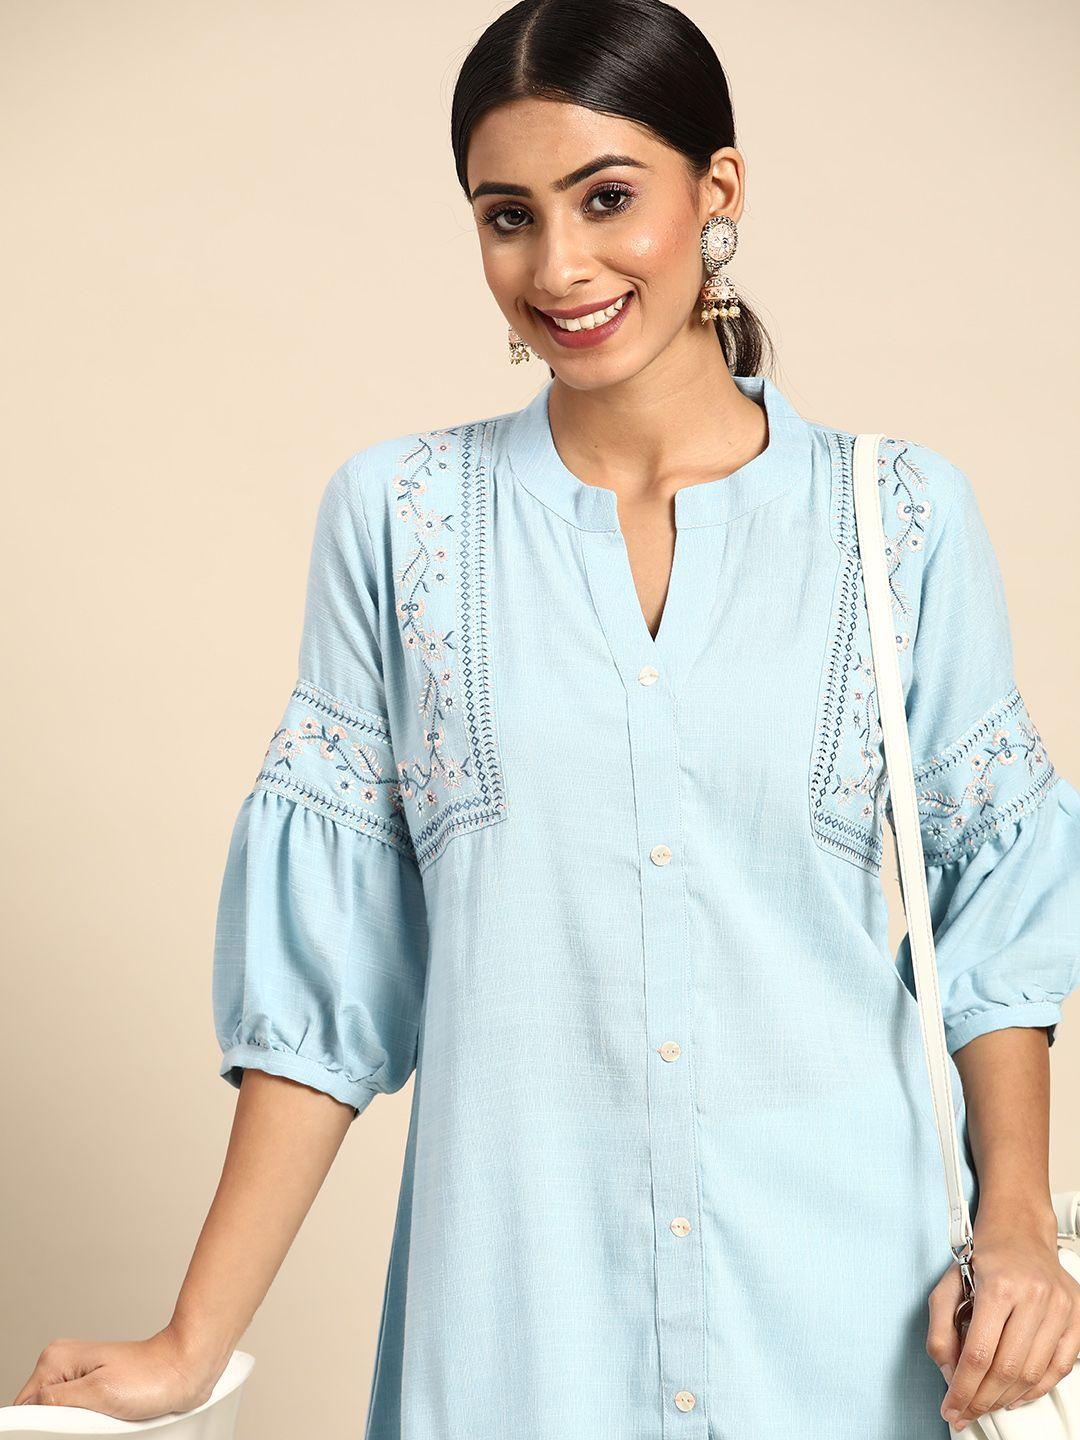 sangria blue embroidered detail a-line top